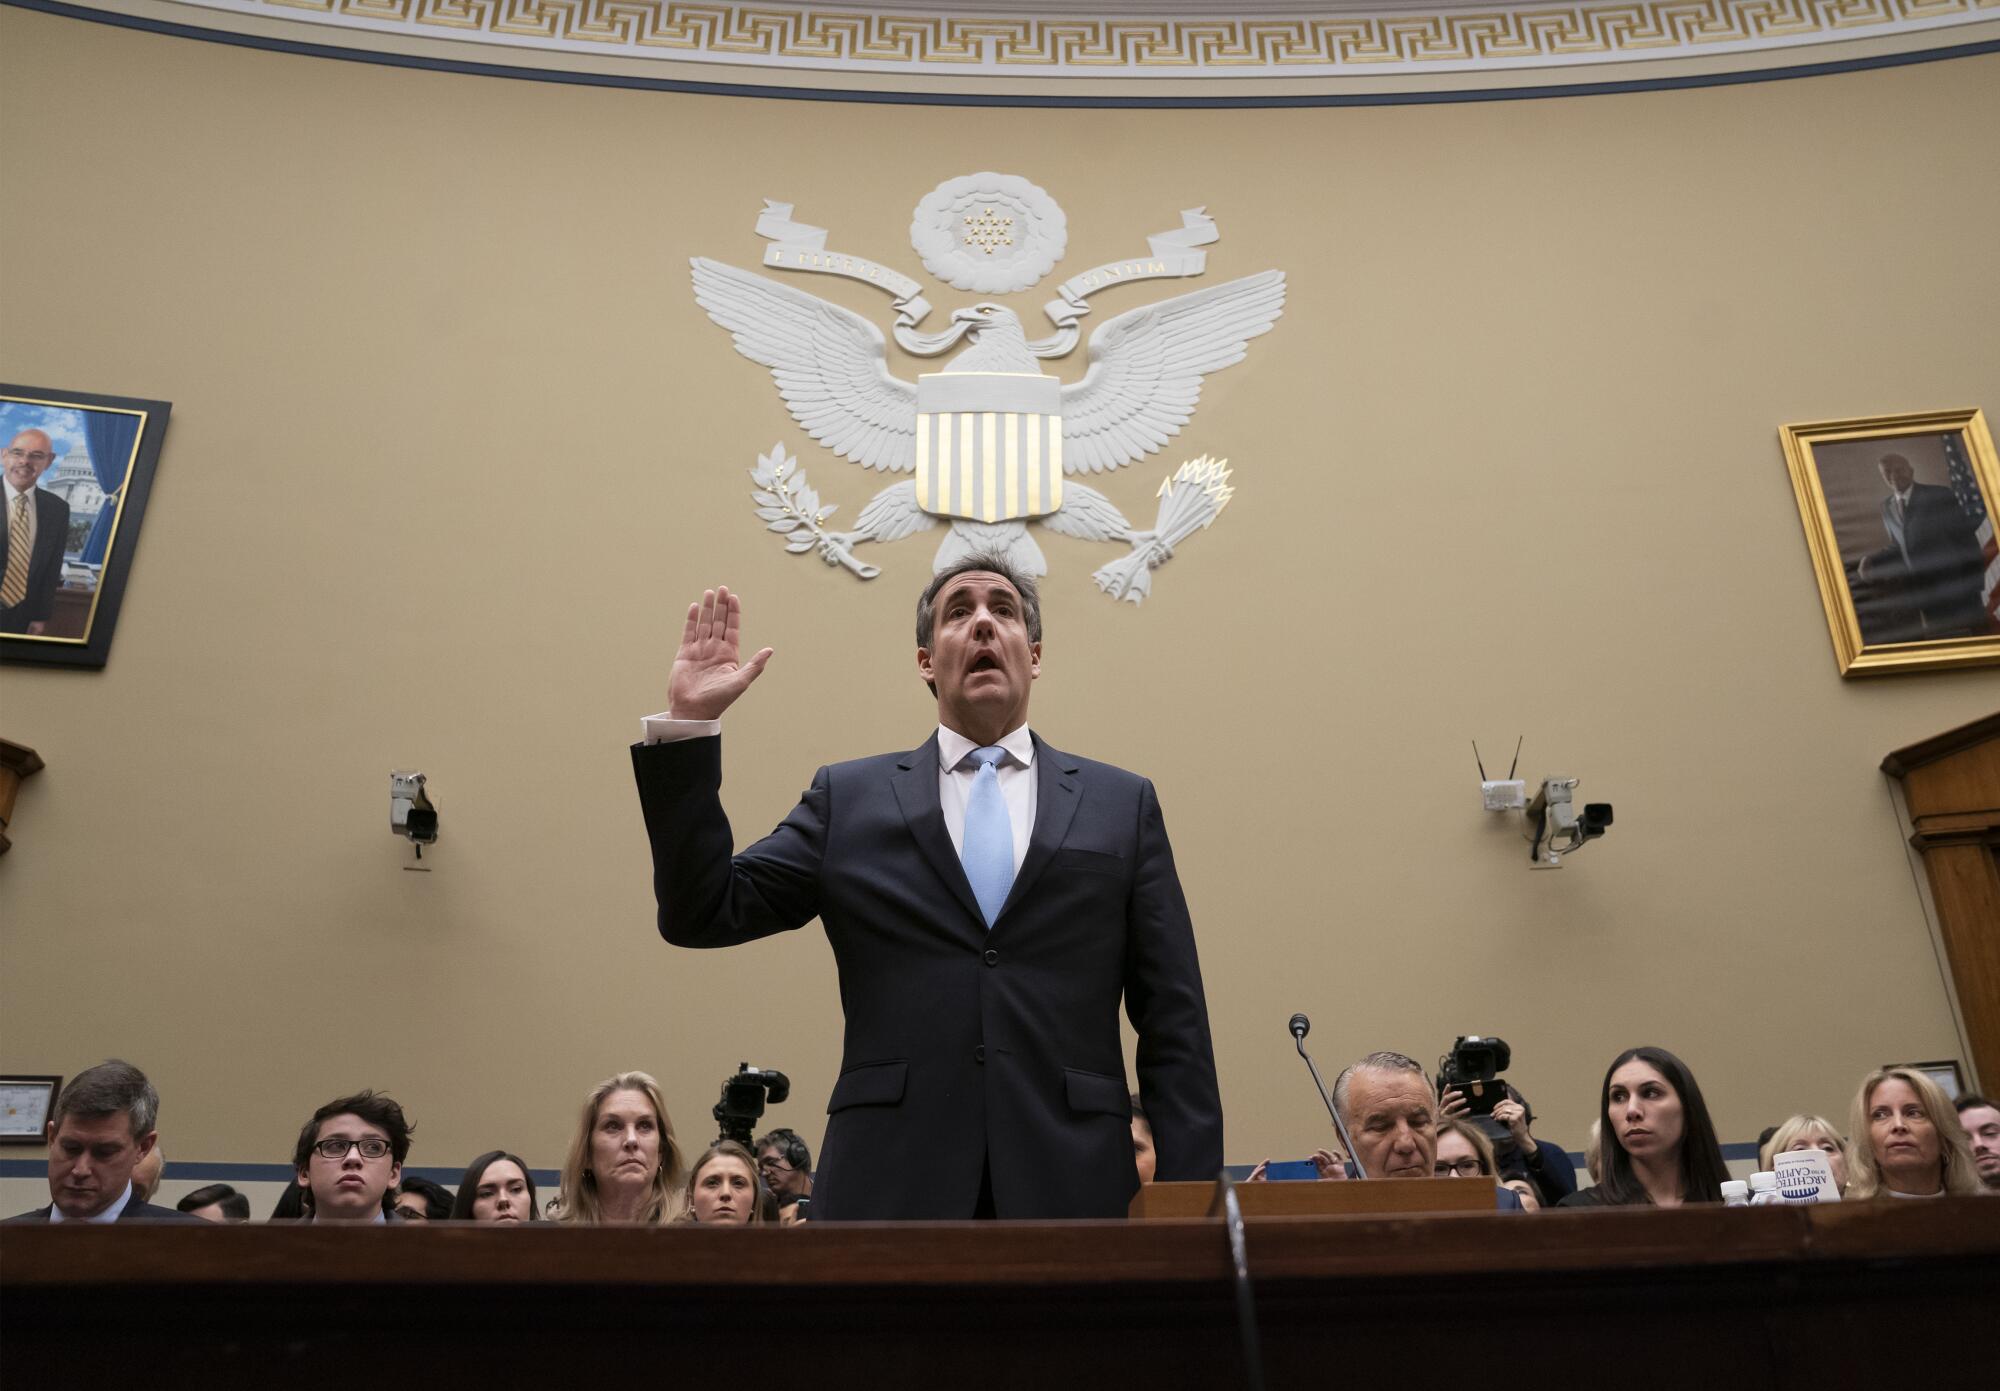 A group sits as Michael Cohen stands, raising his right hand for an oath, below a depiction of the eagle from the House seal.